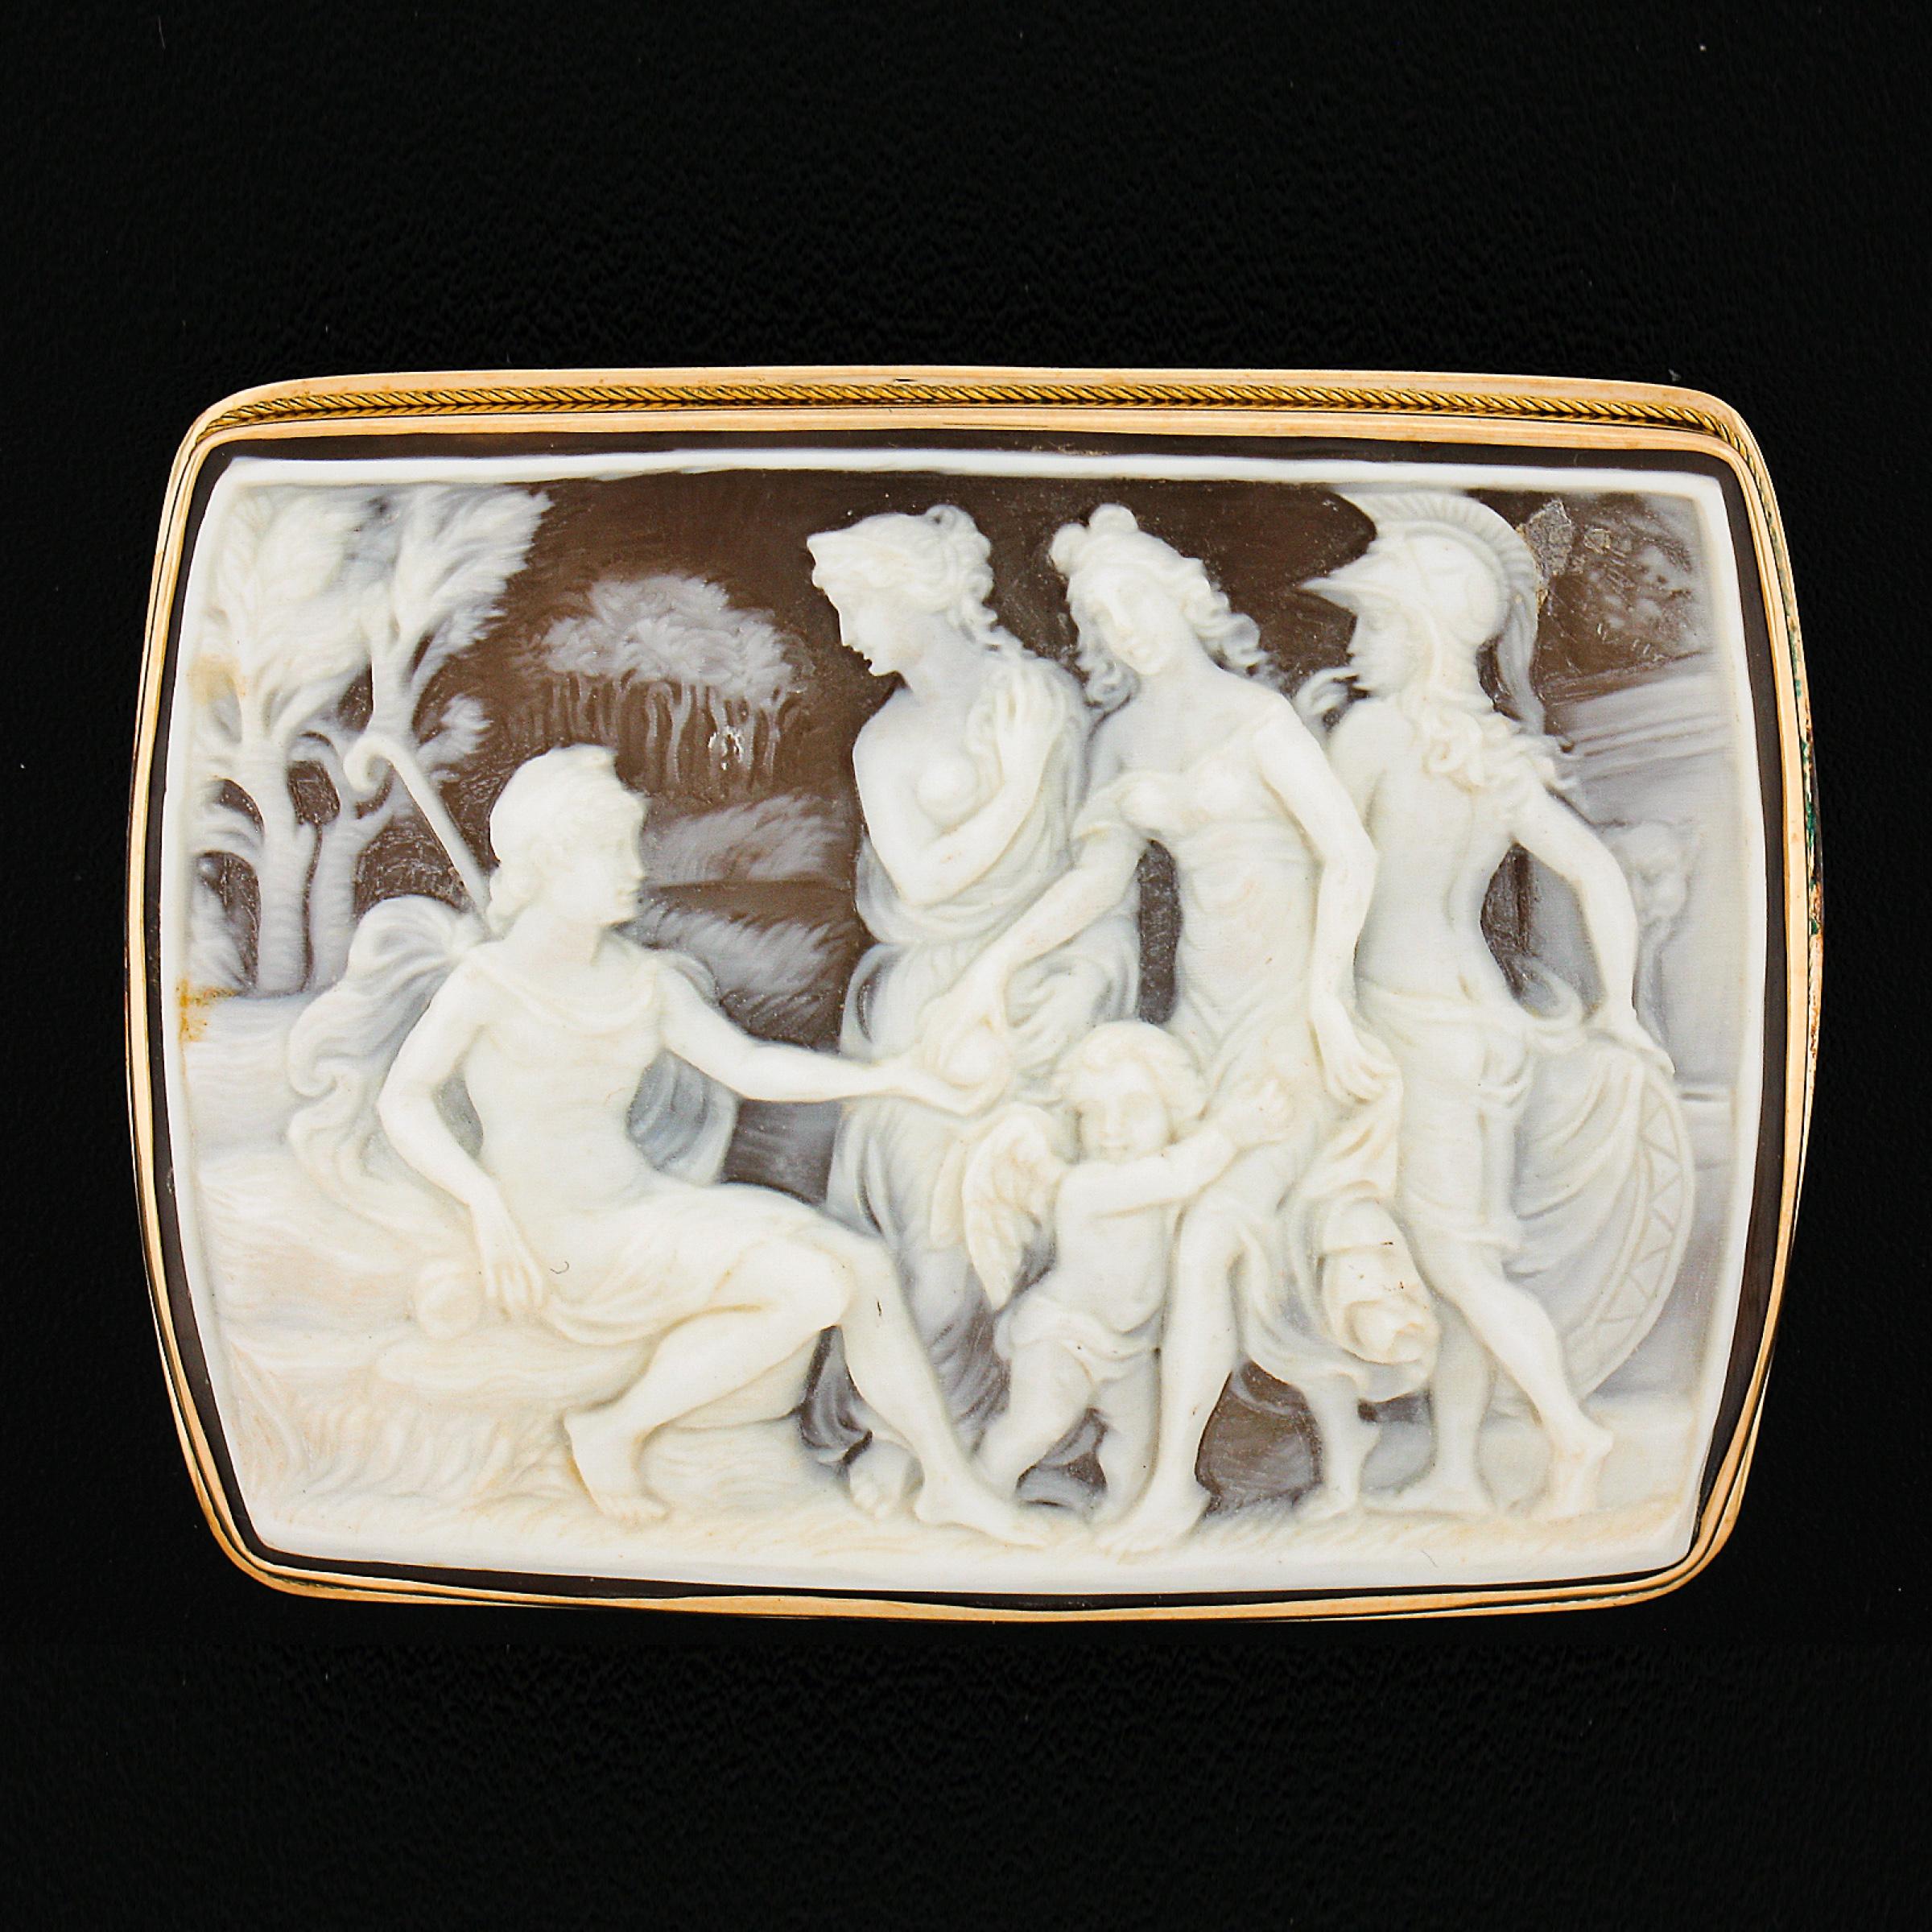 --Stone(s):--
(1) Carved Shell Cameo - Rectangular Shaped - Bezel Set - Light Brown w/ White Color Carving - 42.6x55.1mm (approx.)

Material: 18k Solid Yellow Gold
Total Weight: 17.4 Grams
Overall Height: 44.1mm (1.7